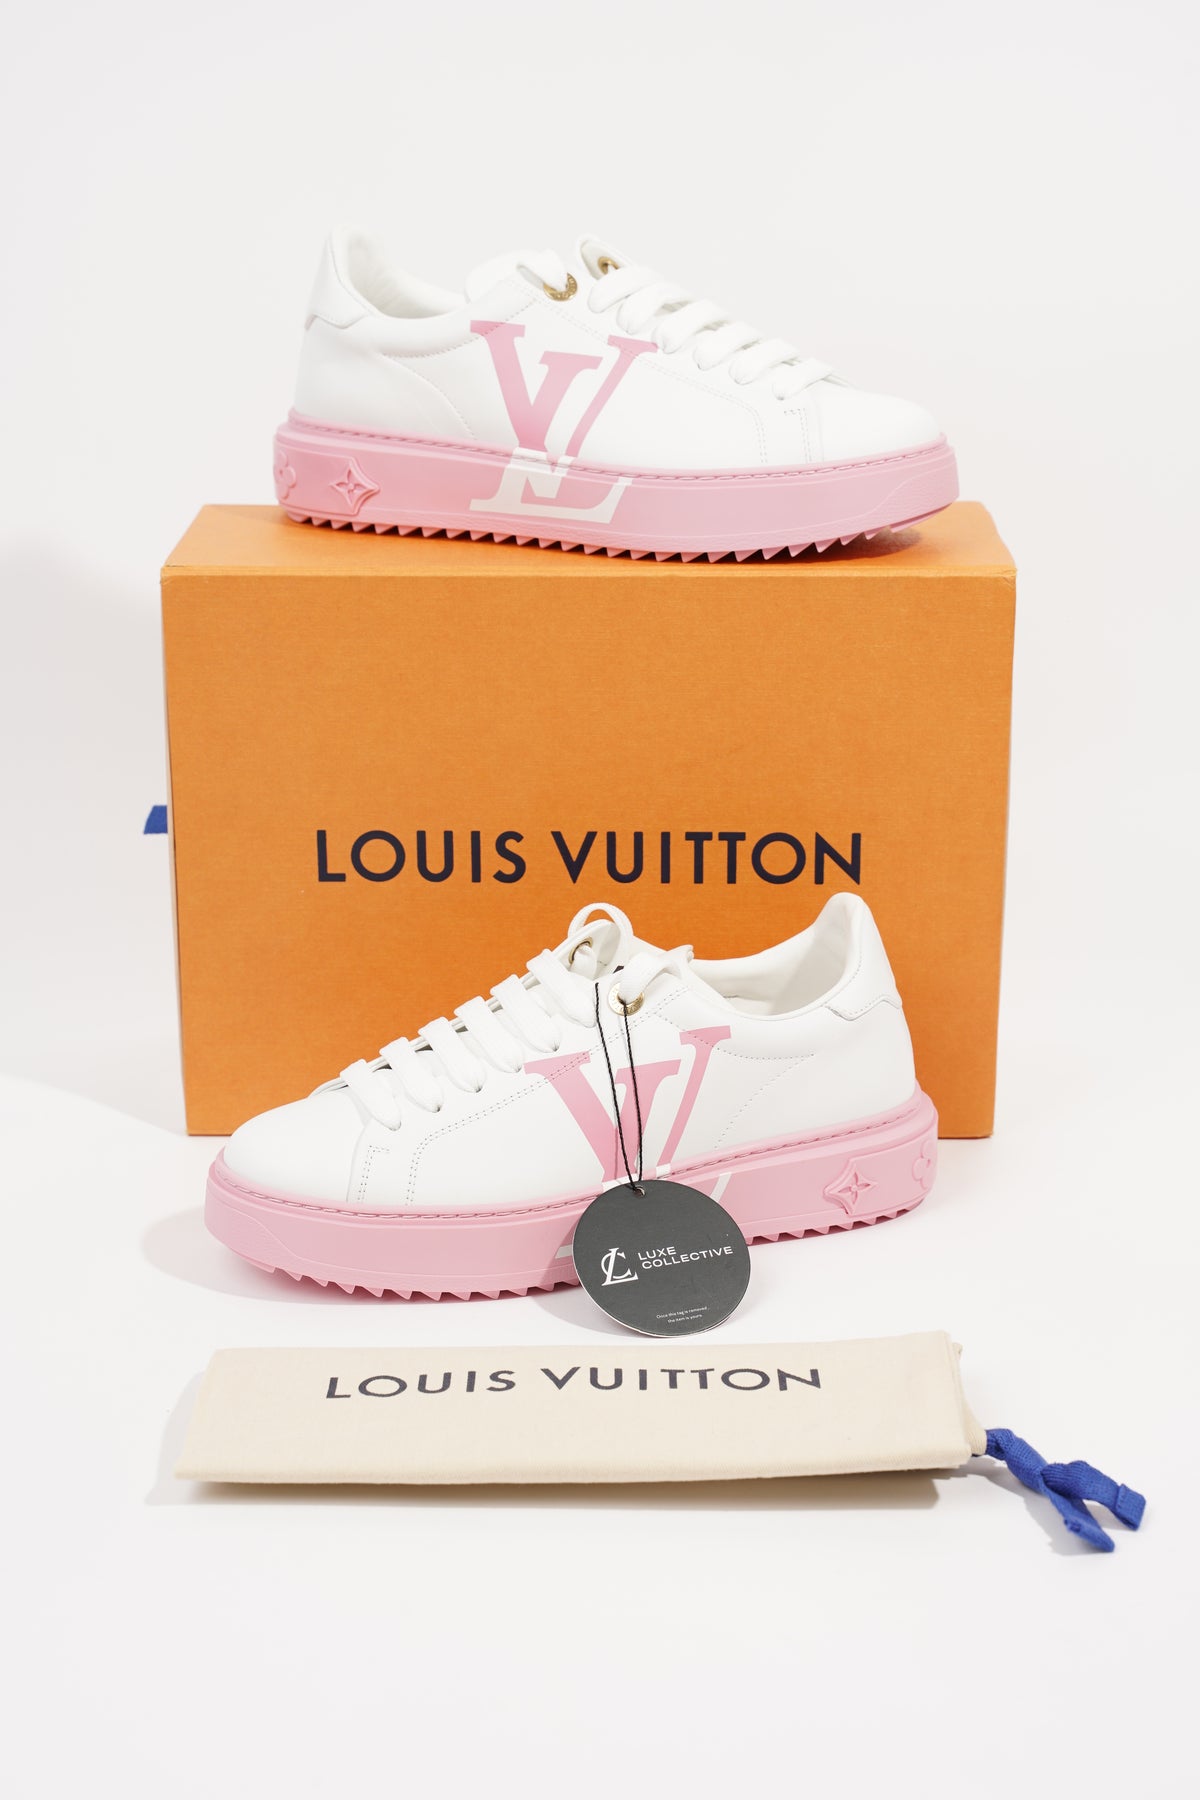 LV Louis Vuitton Time Out Monogram Pink Red White Sneakers Trainers Size 8  42